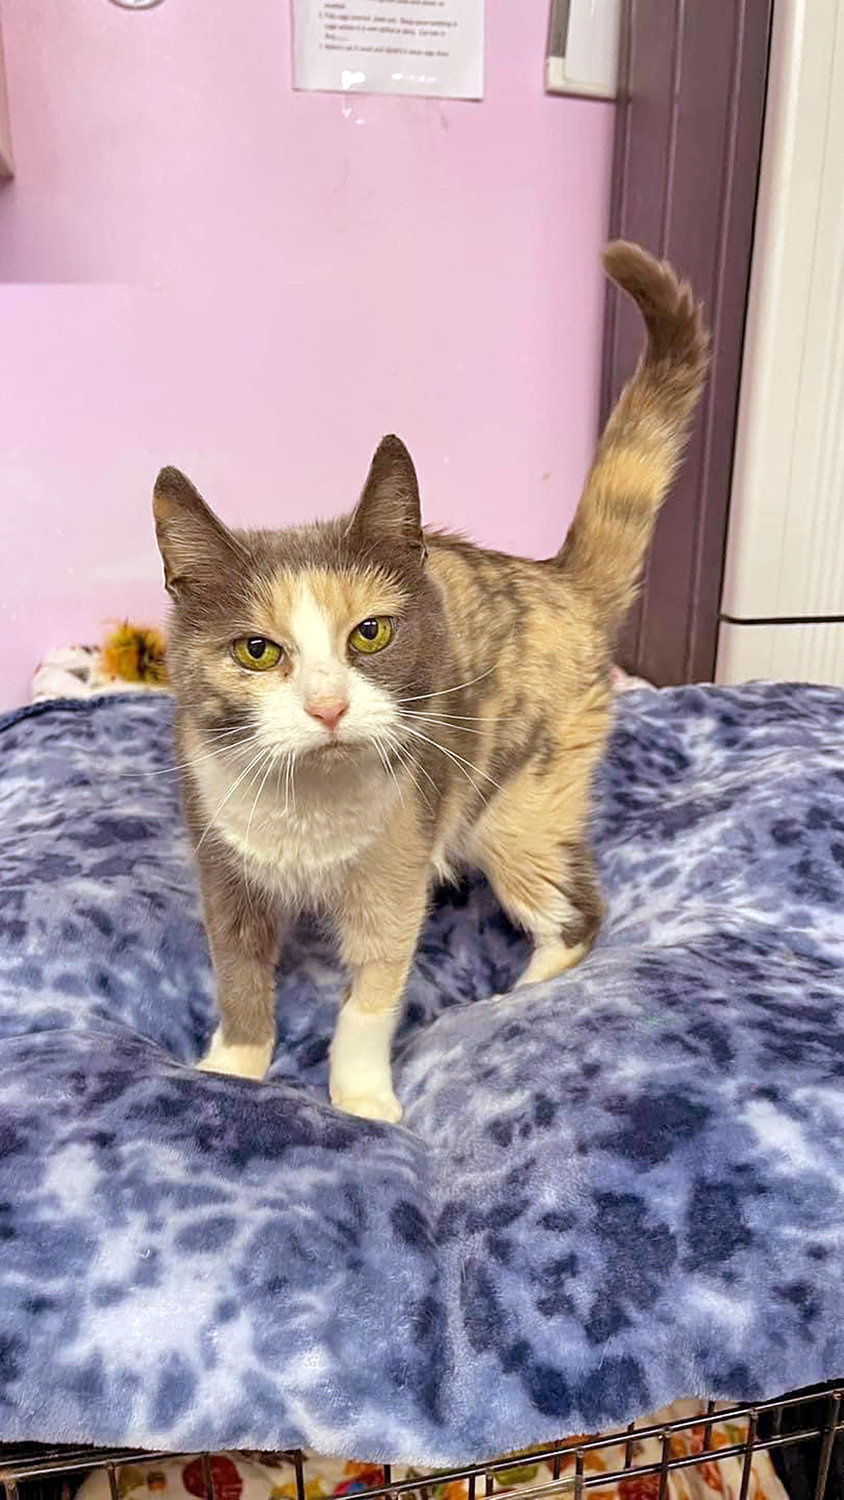 This little 2-year-old girl is Tiana. She had quite the adventure here at the shelter. When she first came to us she got in a little trouble by eating something she shouldn’t have. Thankfully, we caught it in time to help her out.  She would do best in a quiet household, one with someone that would spend a lot of time with her and love her to bits.  A few of Tiana’s favorite things include laying in cat beds, wet food and lots of attention! She also will gobble up any type of Fancy Feast Gravy Lovers, chunky, or the primavera wet food — it’s her favorite!  To visit Tiana, stop by the Humane Society of Rome, 6247 Lamphear Road, call 315-336-7070 or go to www.humanesocietyrome.com.